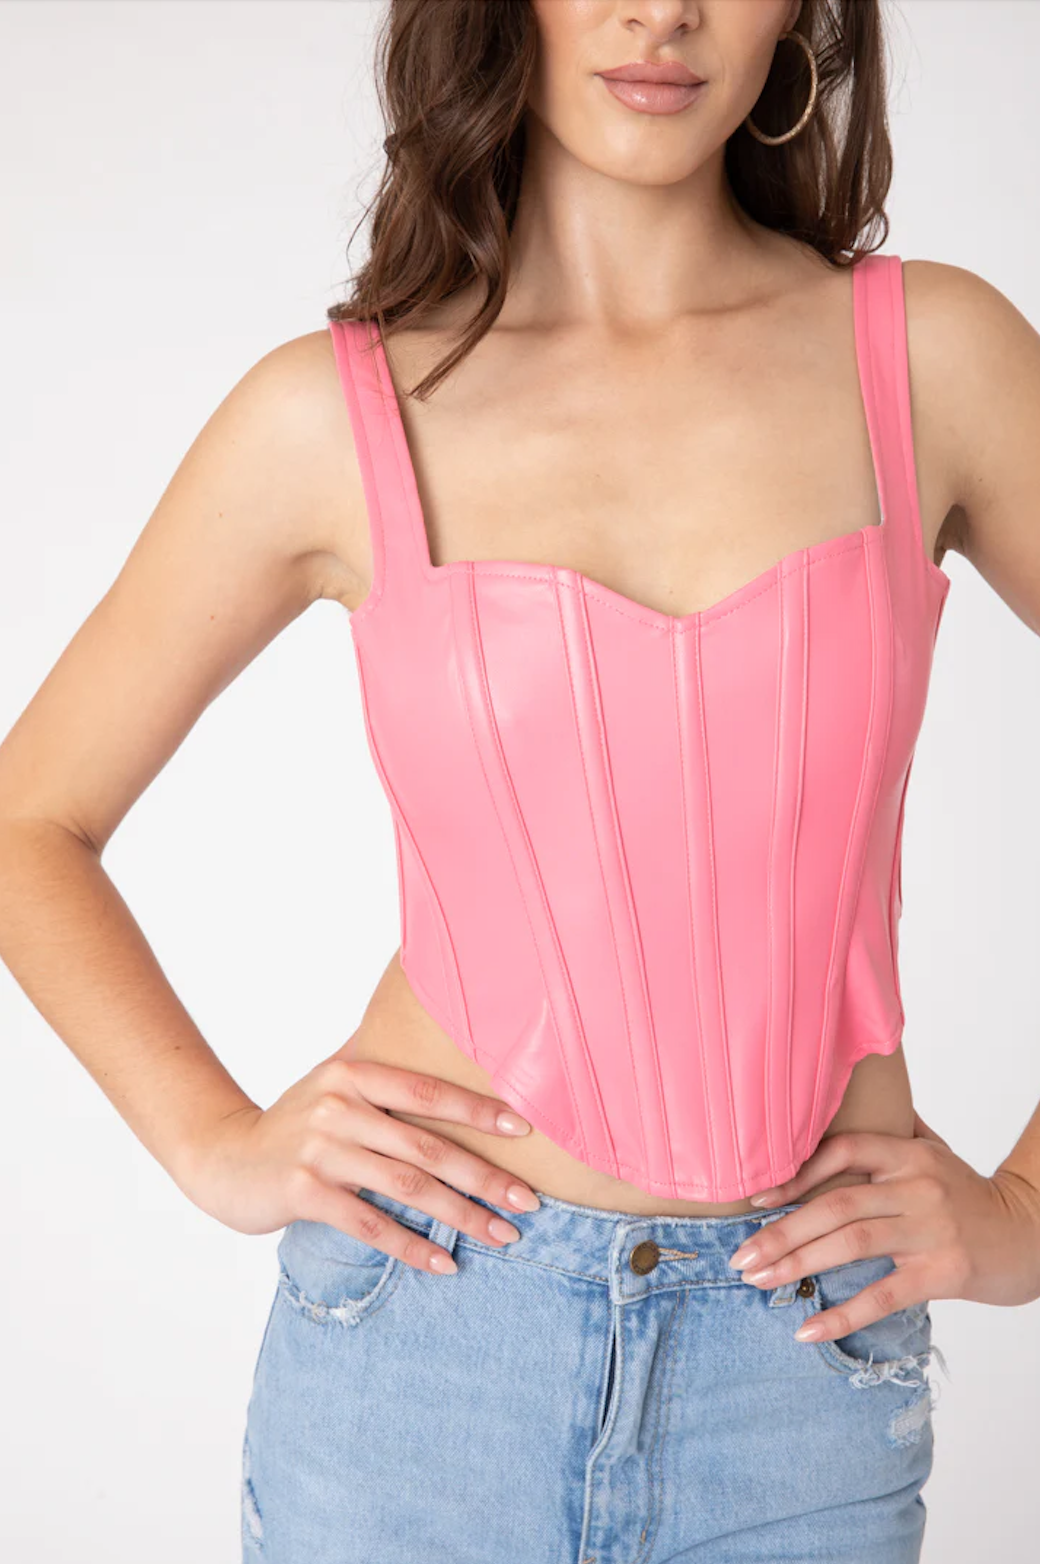 ADORINGLY YOURS BUSTIER TOP IN PINK